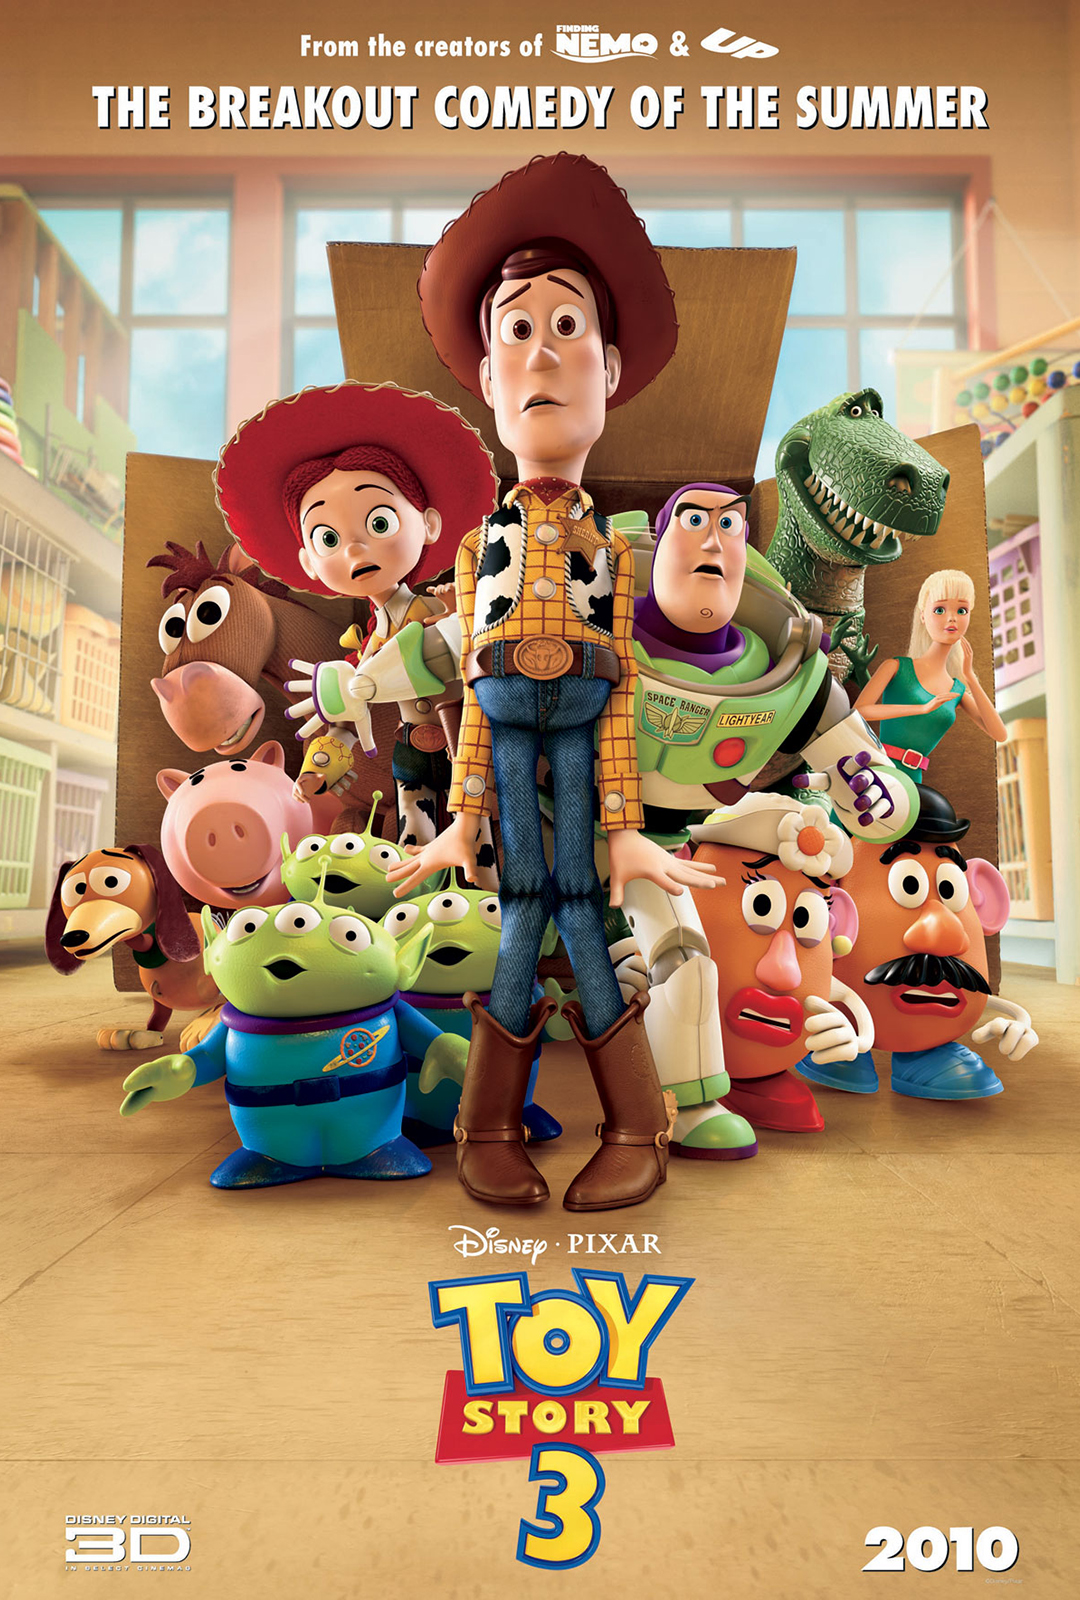 TOY STORY 3 Poster by Pixar - CG Animation Blog